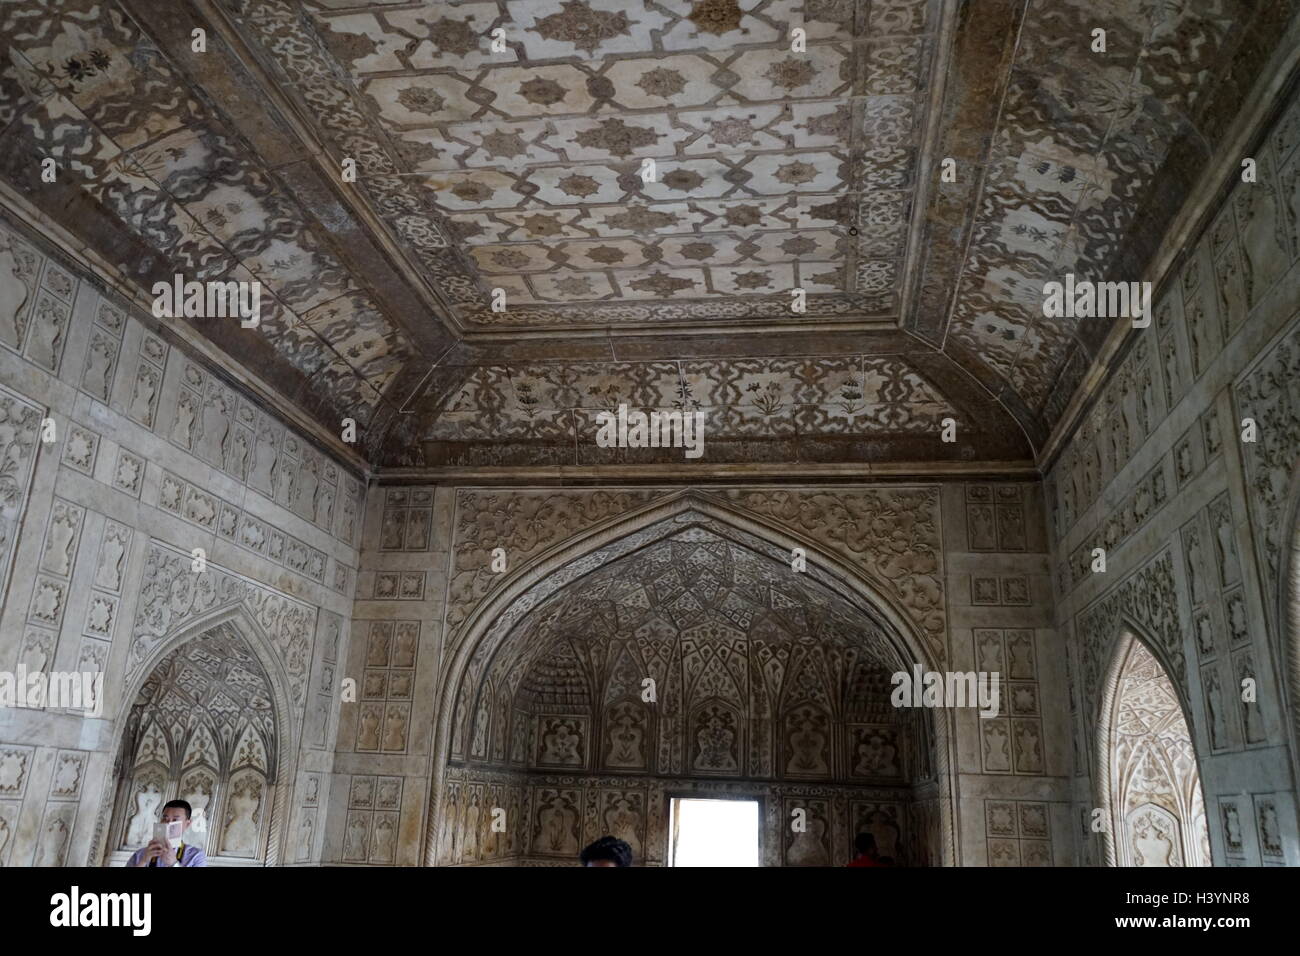 Views of the Agra Fort, the former imperial residence of the Mughal Dynasty, It was used to hold Shah Jahan under house arrest by his son Aurangzeb. Agra, India. Dated 21st Century Stock Photo